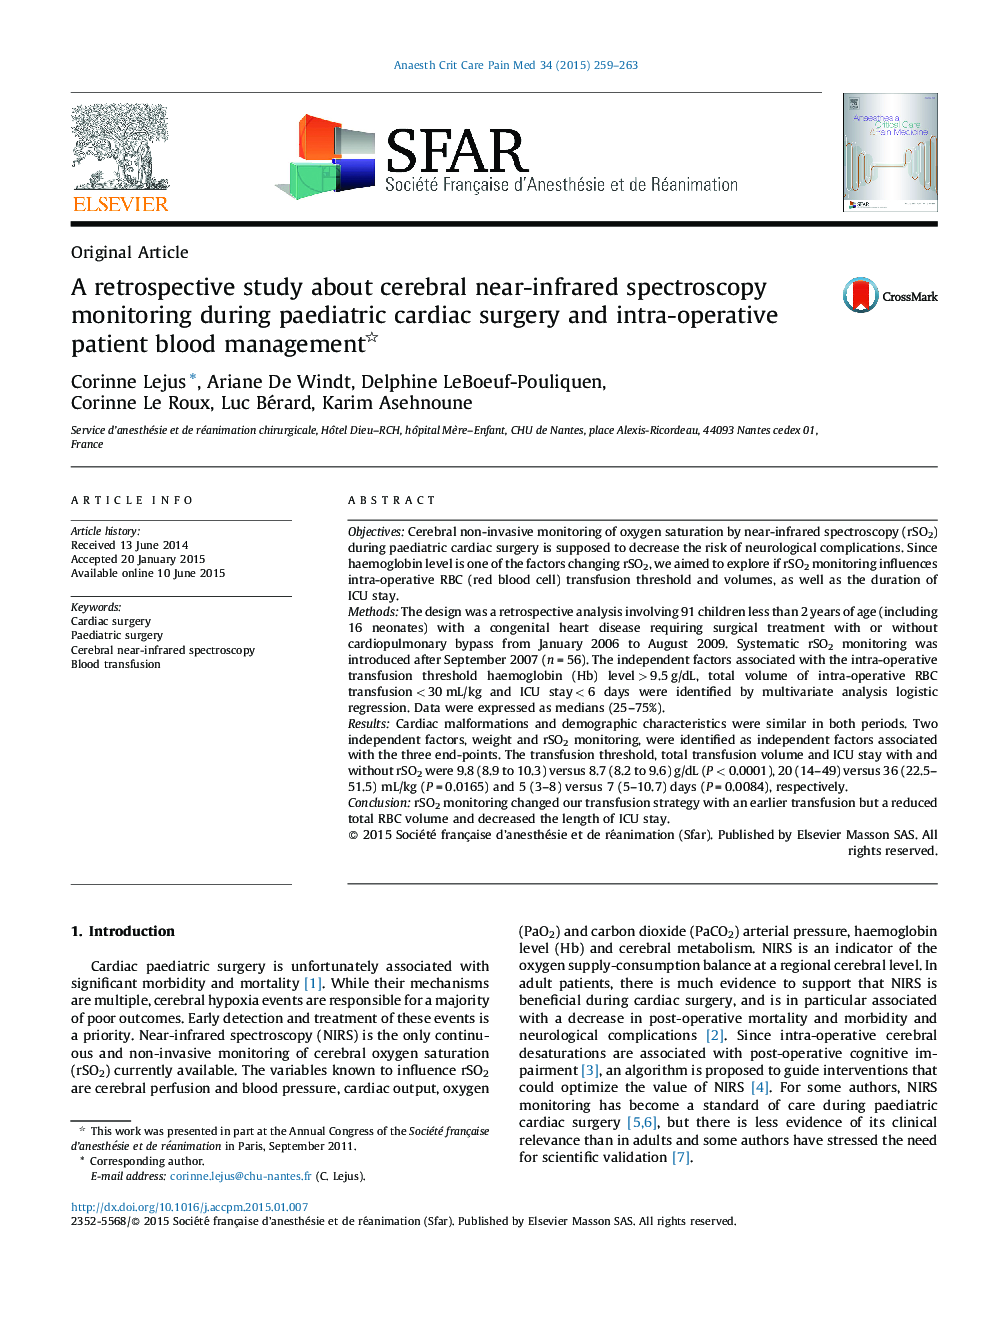 A retrospective study about cerebral near-infrared spectroscopy monitoring during paediatric cardiac surgery and intra-operative patient blood management 